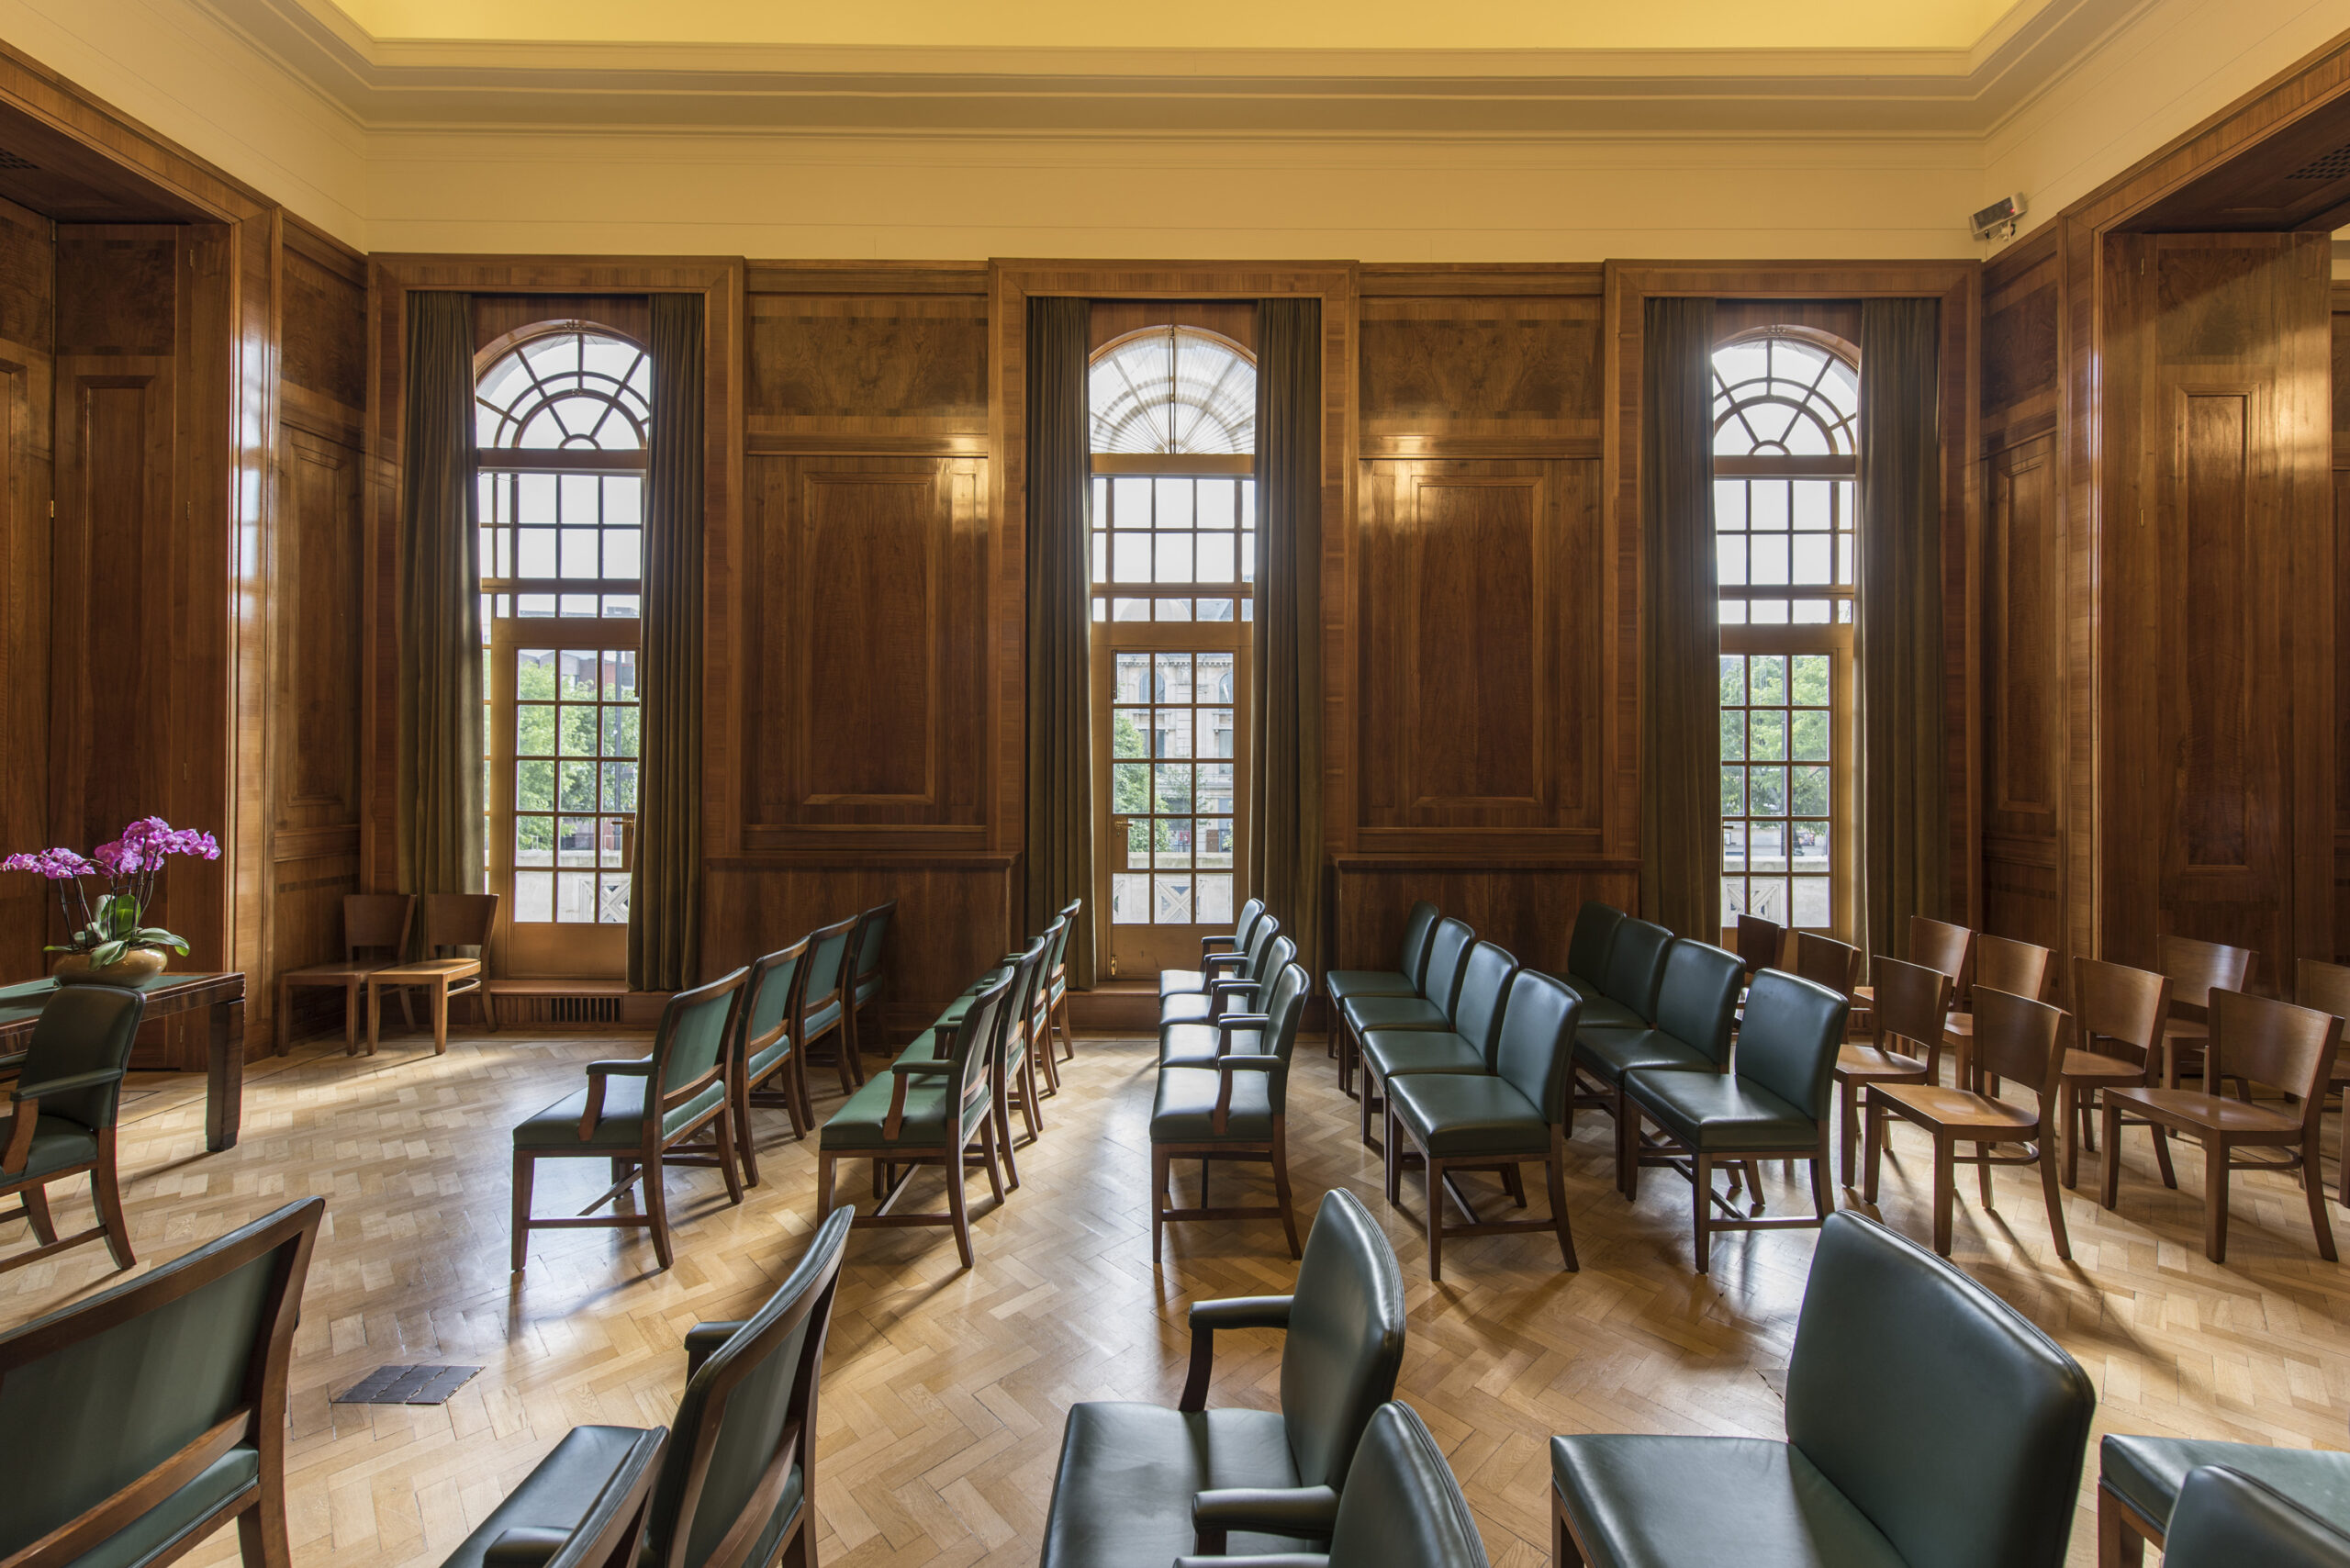 A new space for conferences, performance and celebrations at the Hackney Town Hall